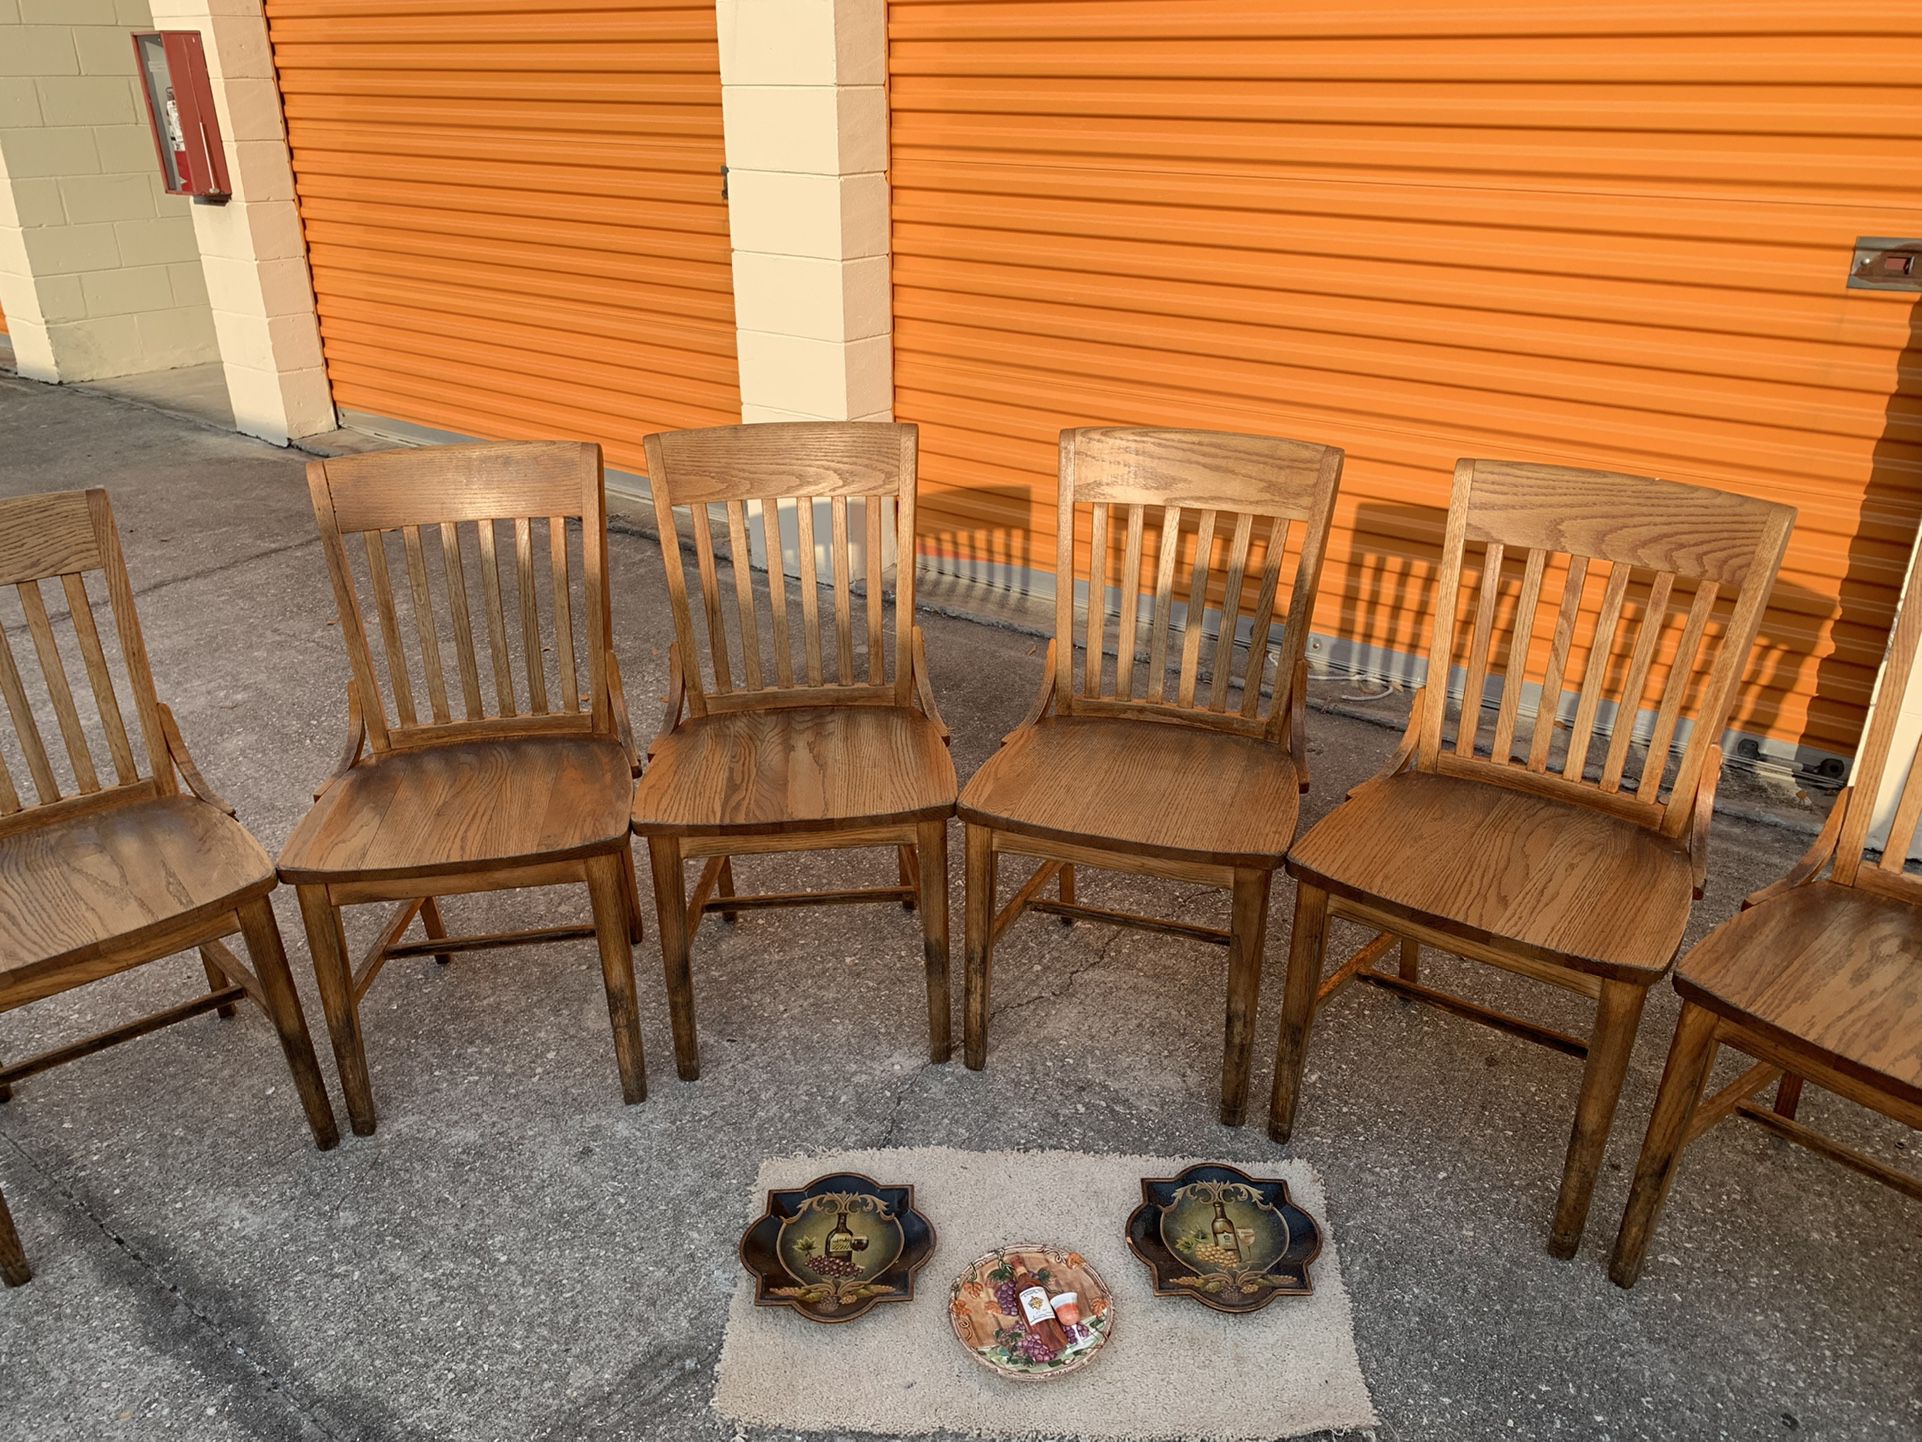 Chairs From $10 To Up $20 🎈🍀🎈table $39  House And Kitchen Furniture, Dining Room Set, Dining Furniture, Restaurant Furniture, Kitchen Dining Item.